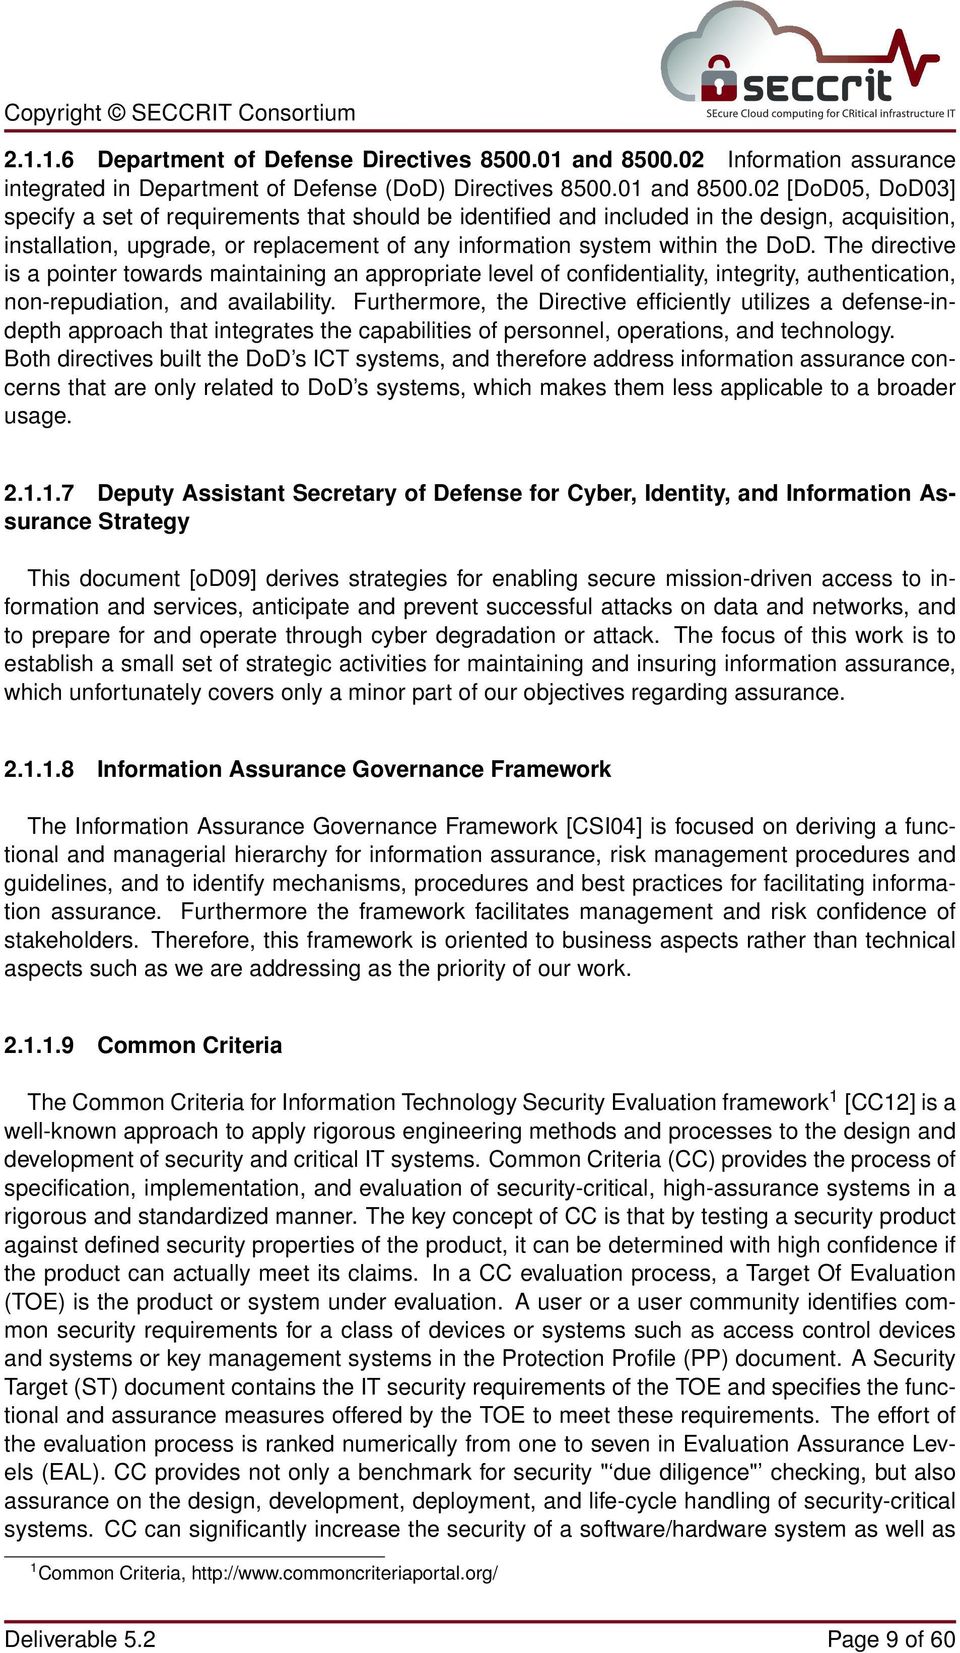 02 [DoD05, DoD03] specify a set of requirements that should be identified and included in the design, acquisition, installation, upgrade, or replacement of any information system within the DoD.